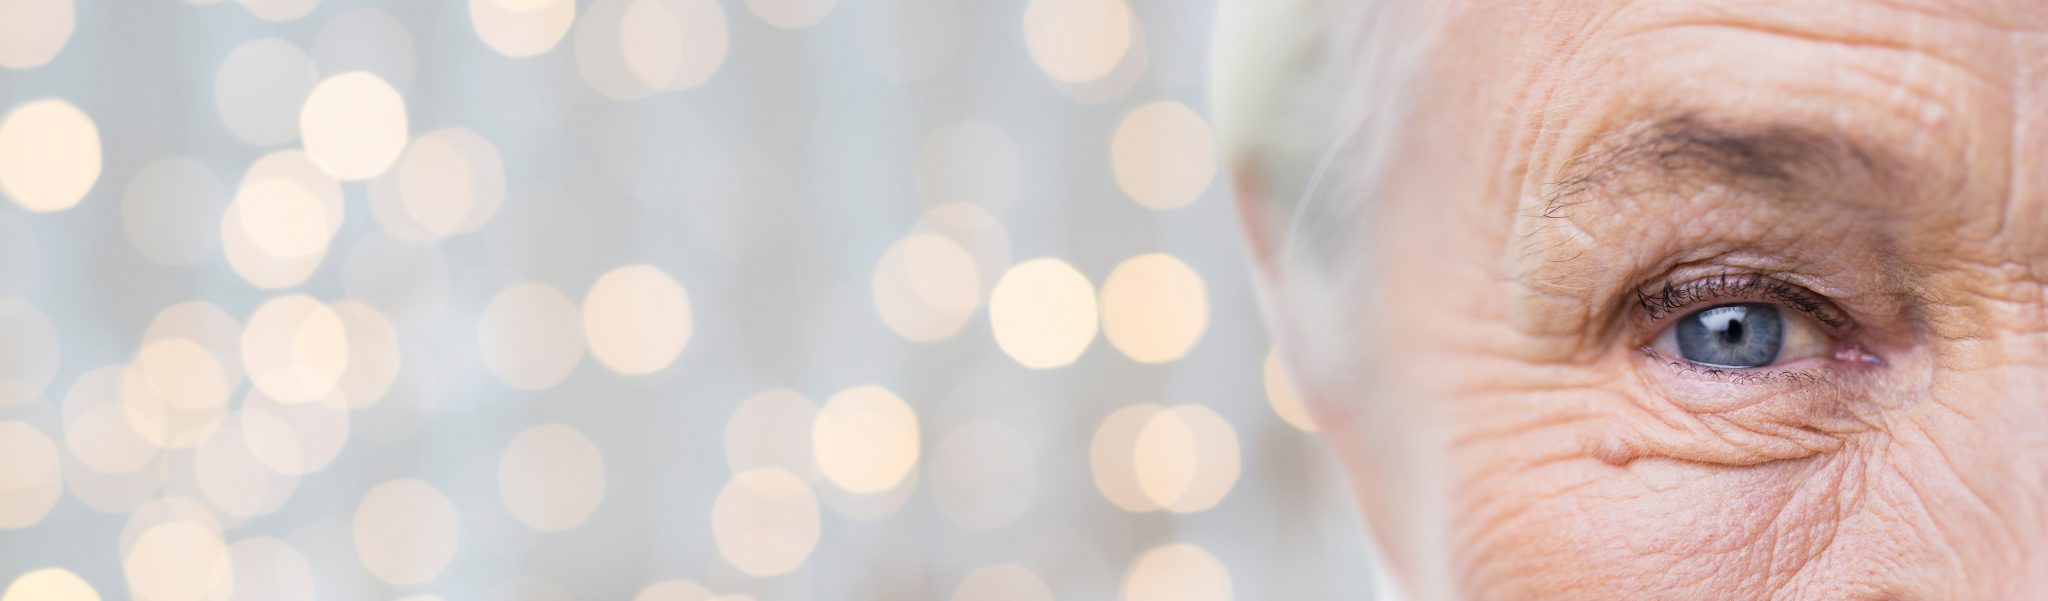 age, vision and old people concept - close up of senior woman face and eye over holidays lights background